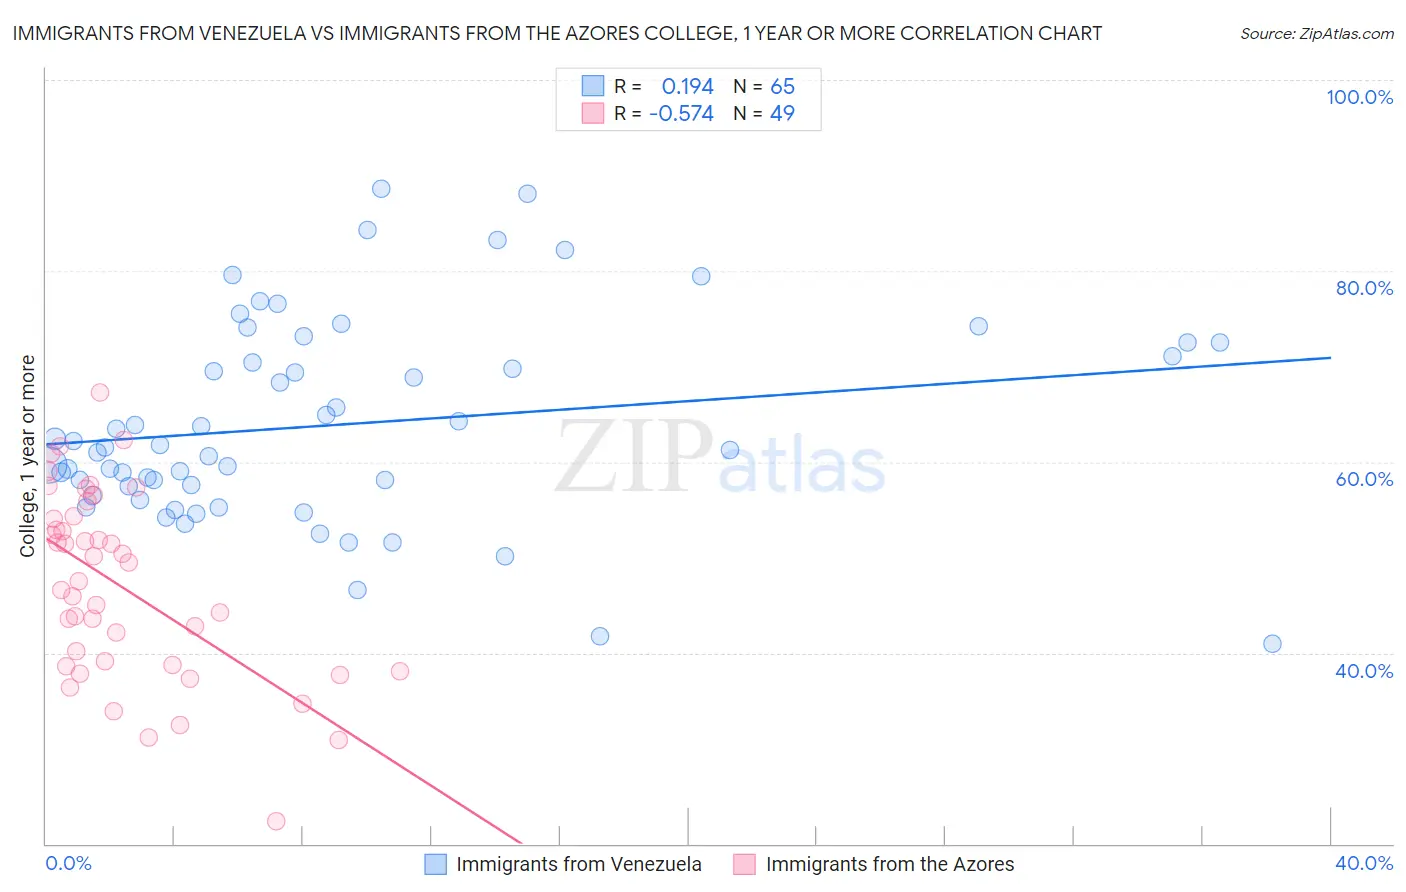 Immigrants from Venezuela vs Immigrants from the Azores College, 1 year or more